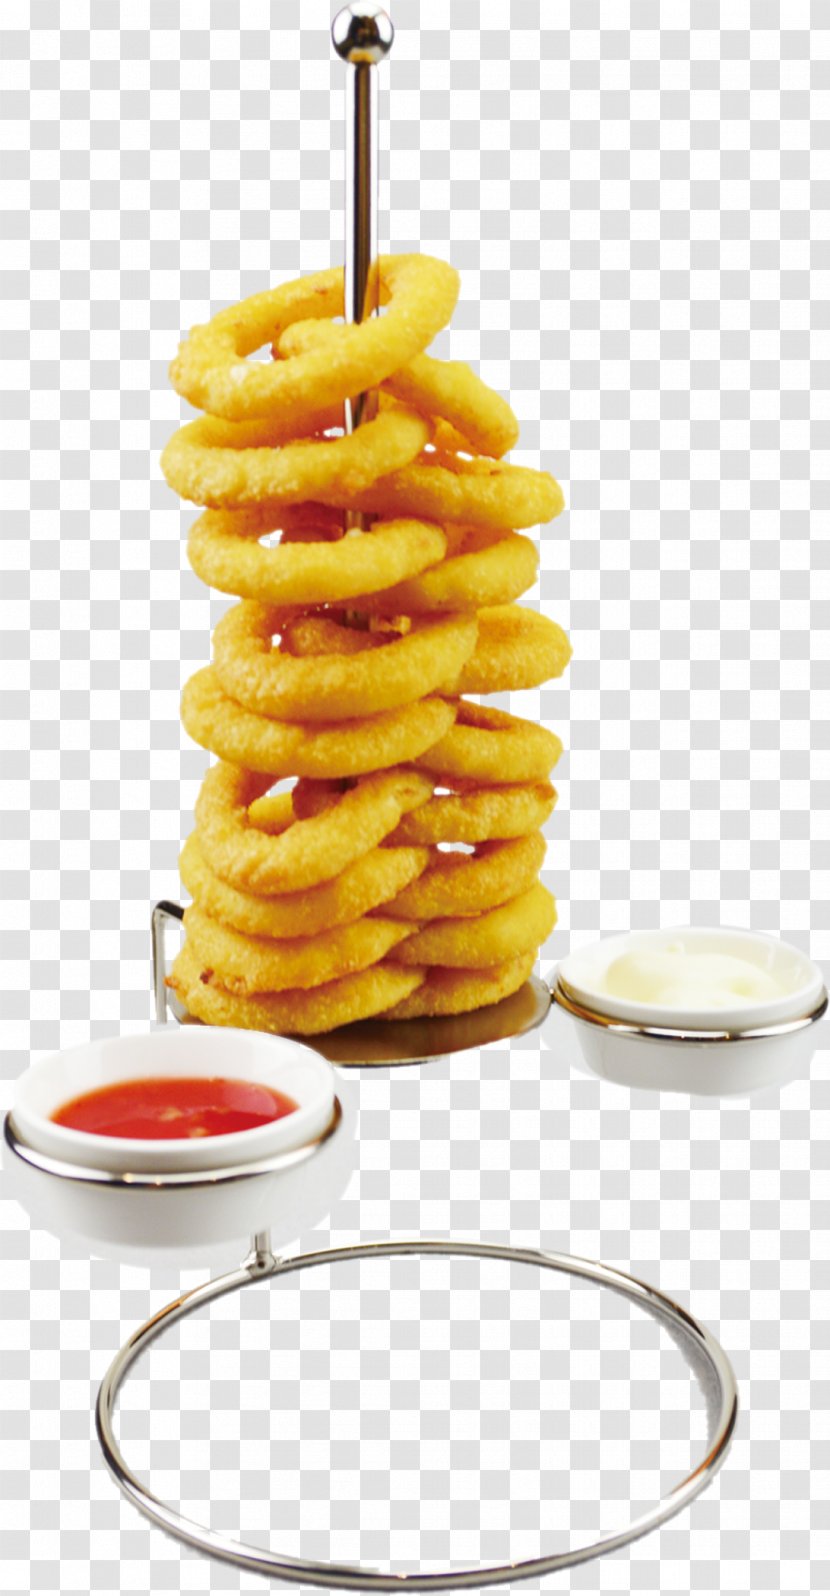 Onion Ring Fast Food Pancake - Restaurant - Western Rings Transparent PNG